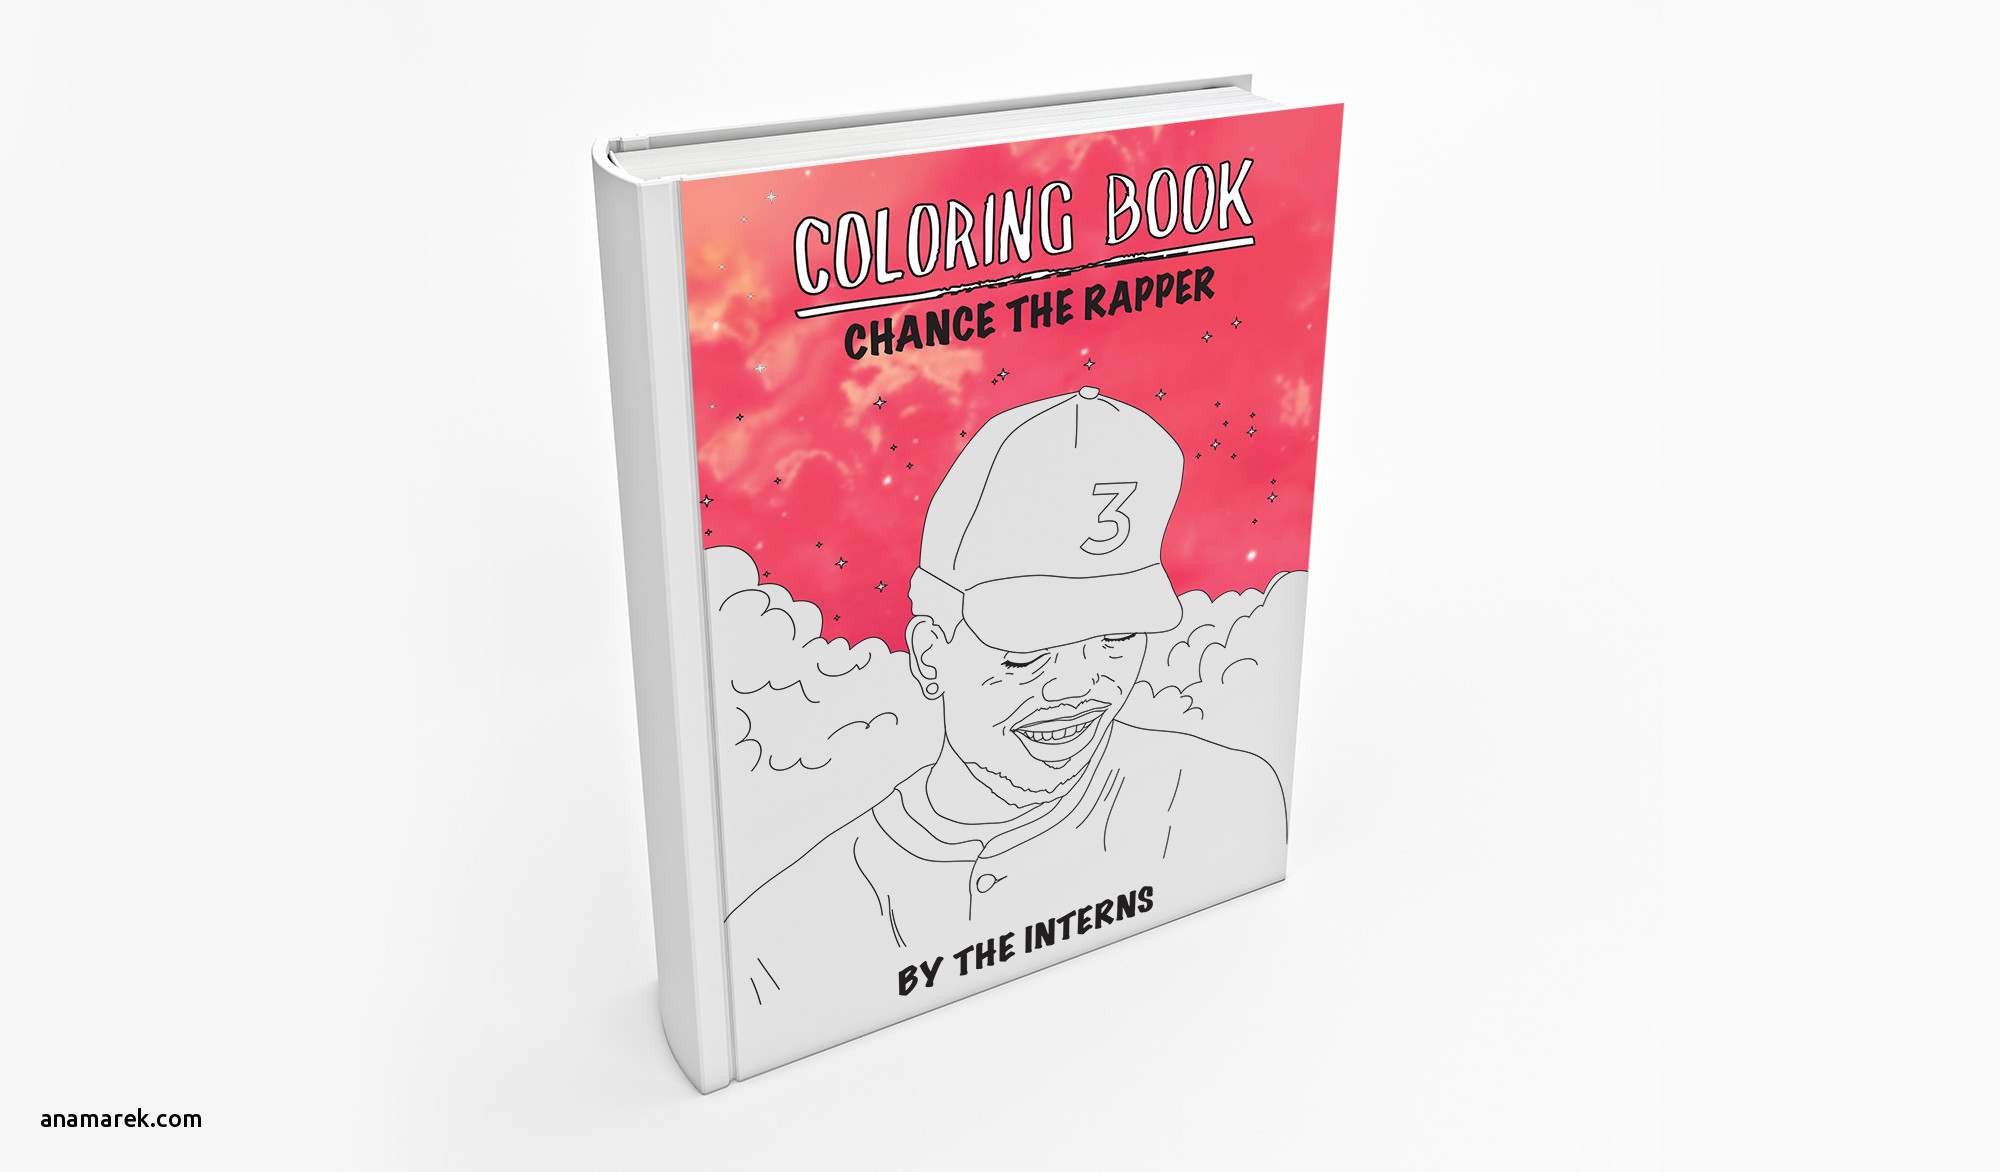 Coloring Book Chance The Rapper Vinyl
 Chance The Rapper Coloring Book Vinyl coloring page